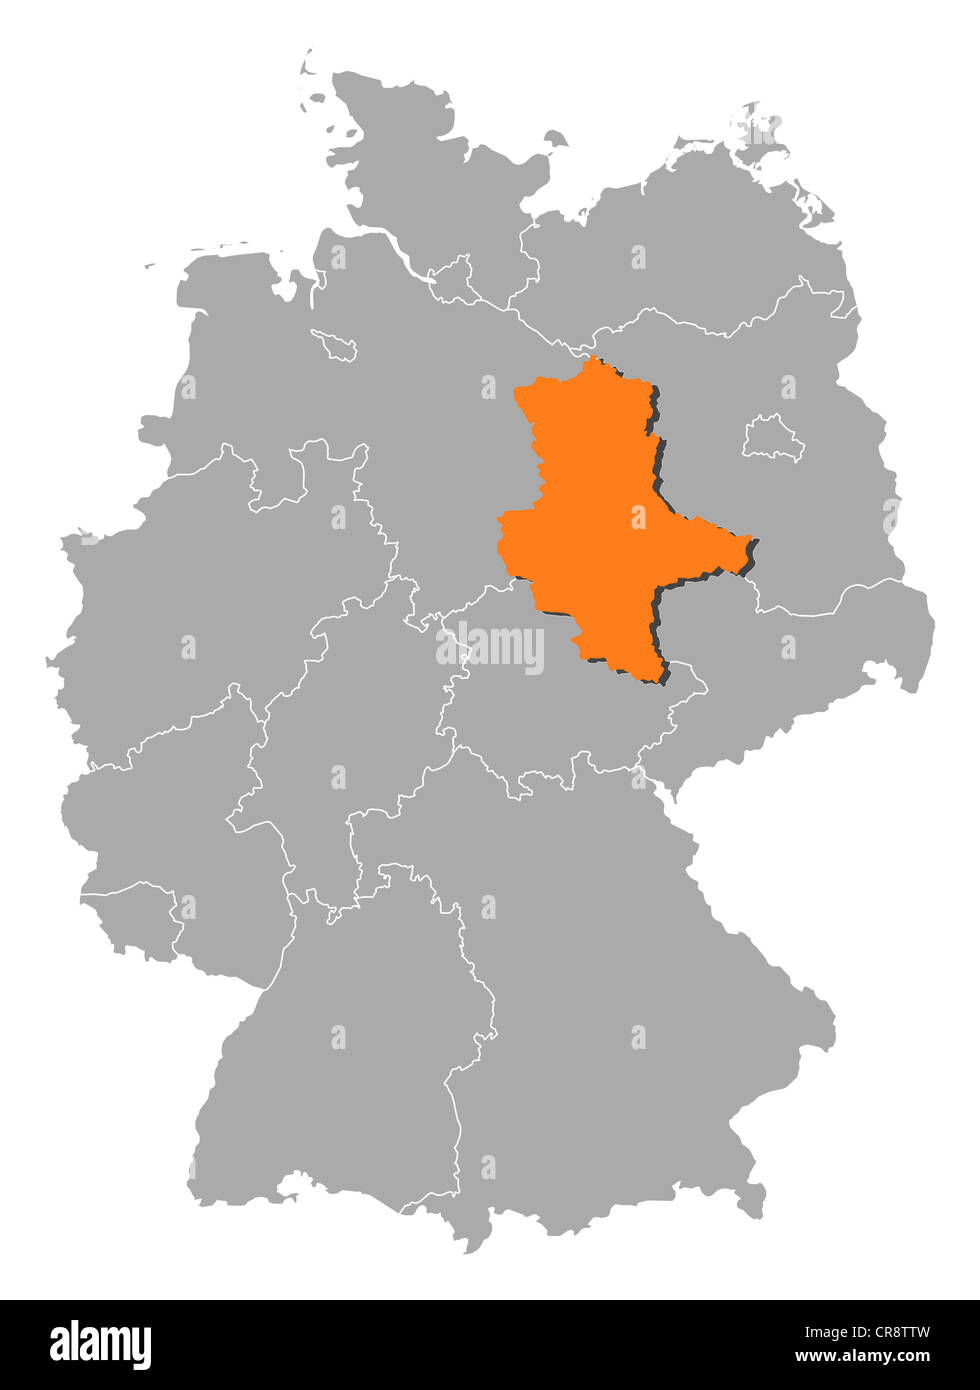 Political map of Germany with the several states where Saxony-Anhalt is highlighted. Stock Photo